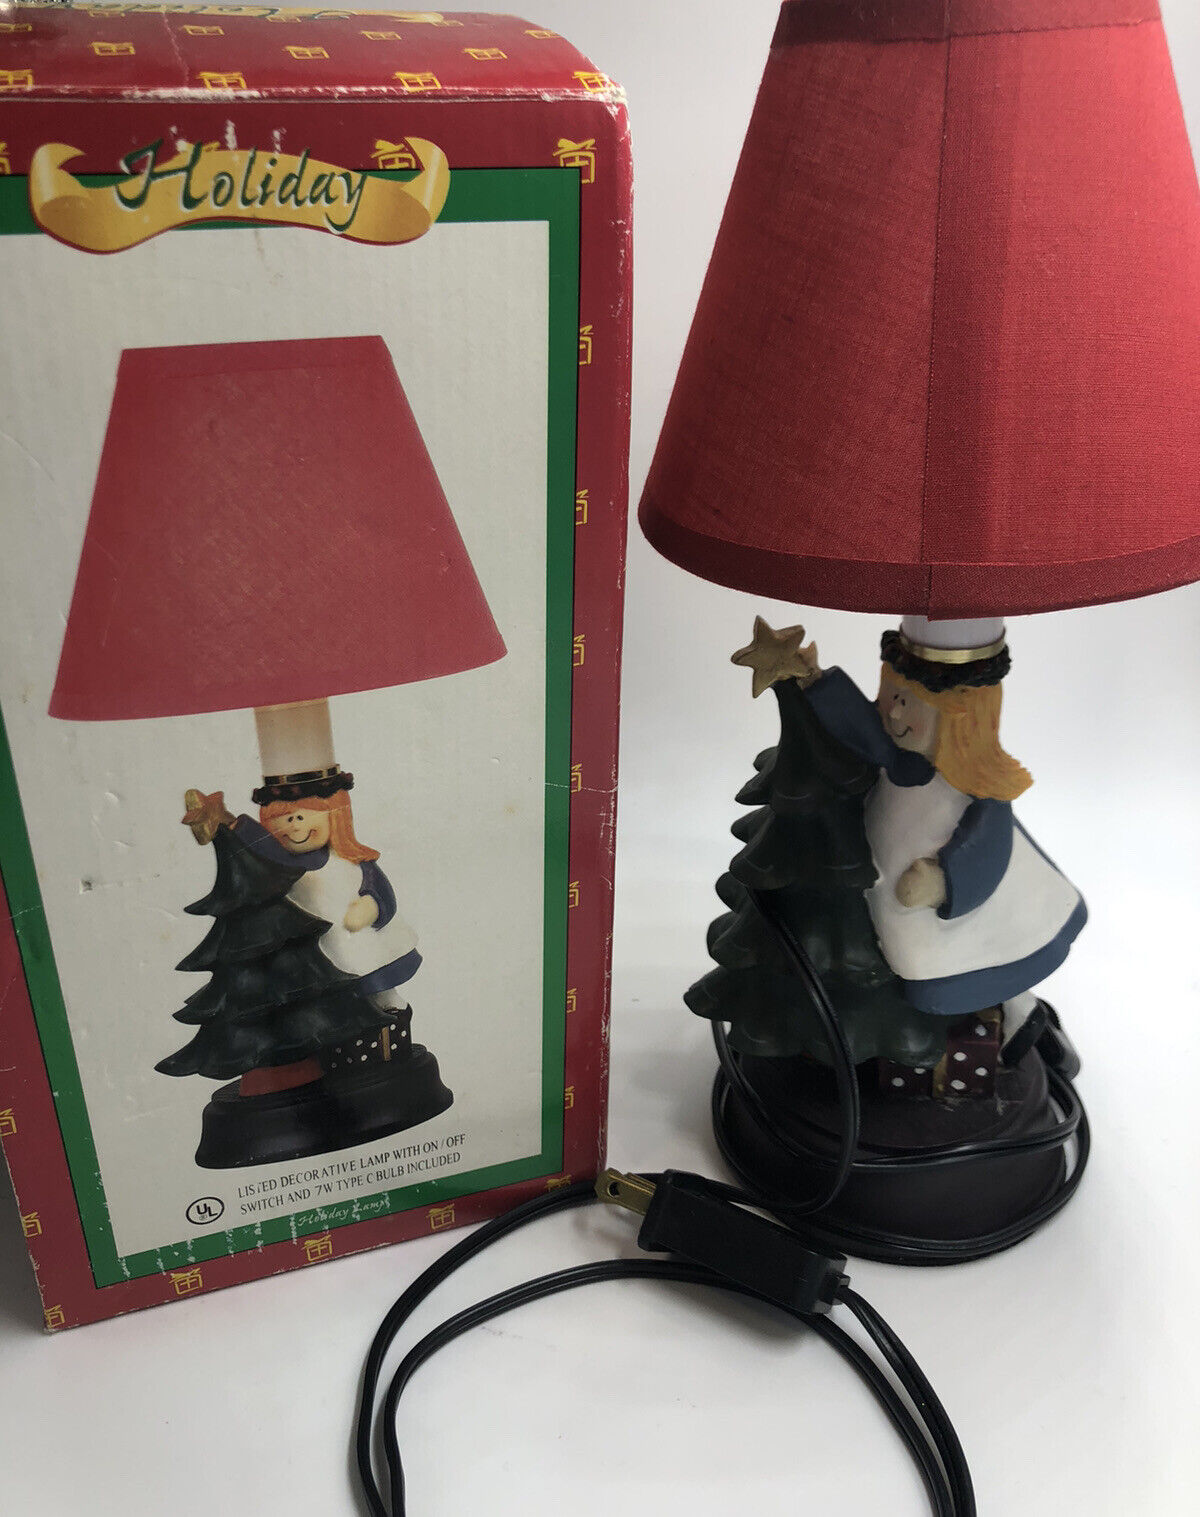 Vintage Holiday Christmas Indoor Lamp, With Box, TESTED WORKING